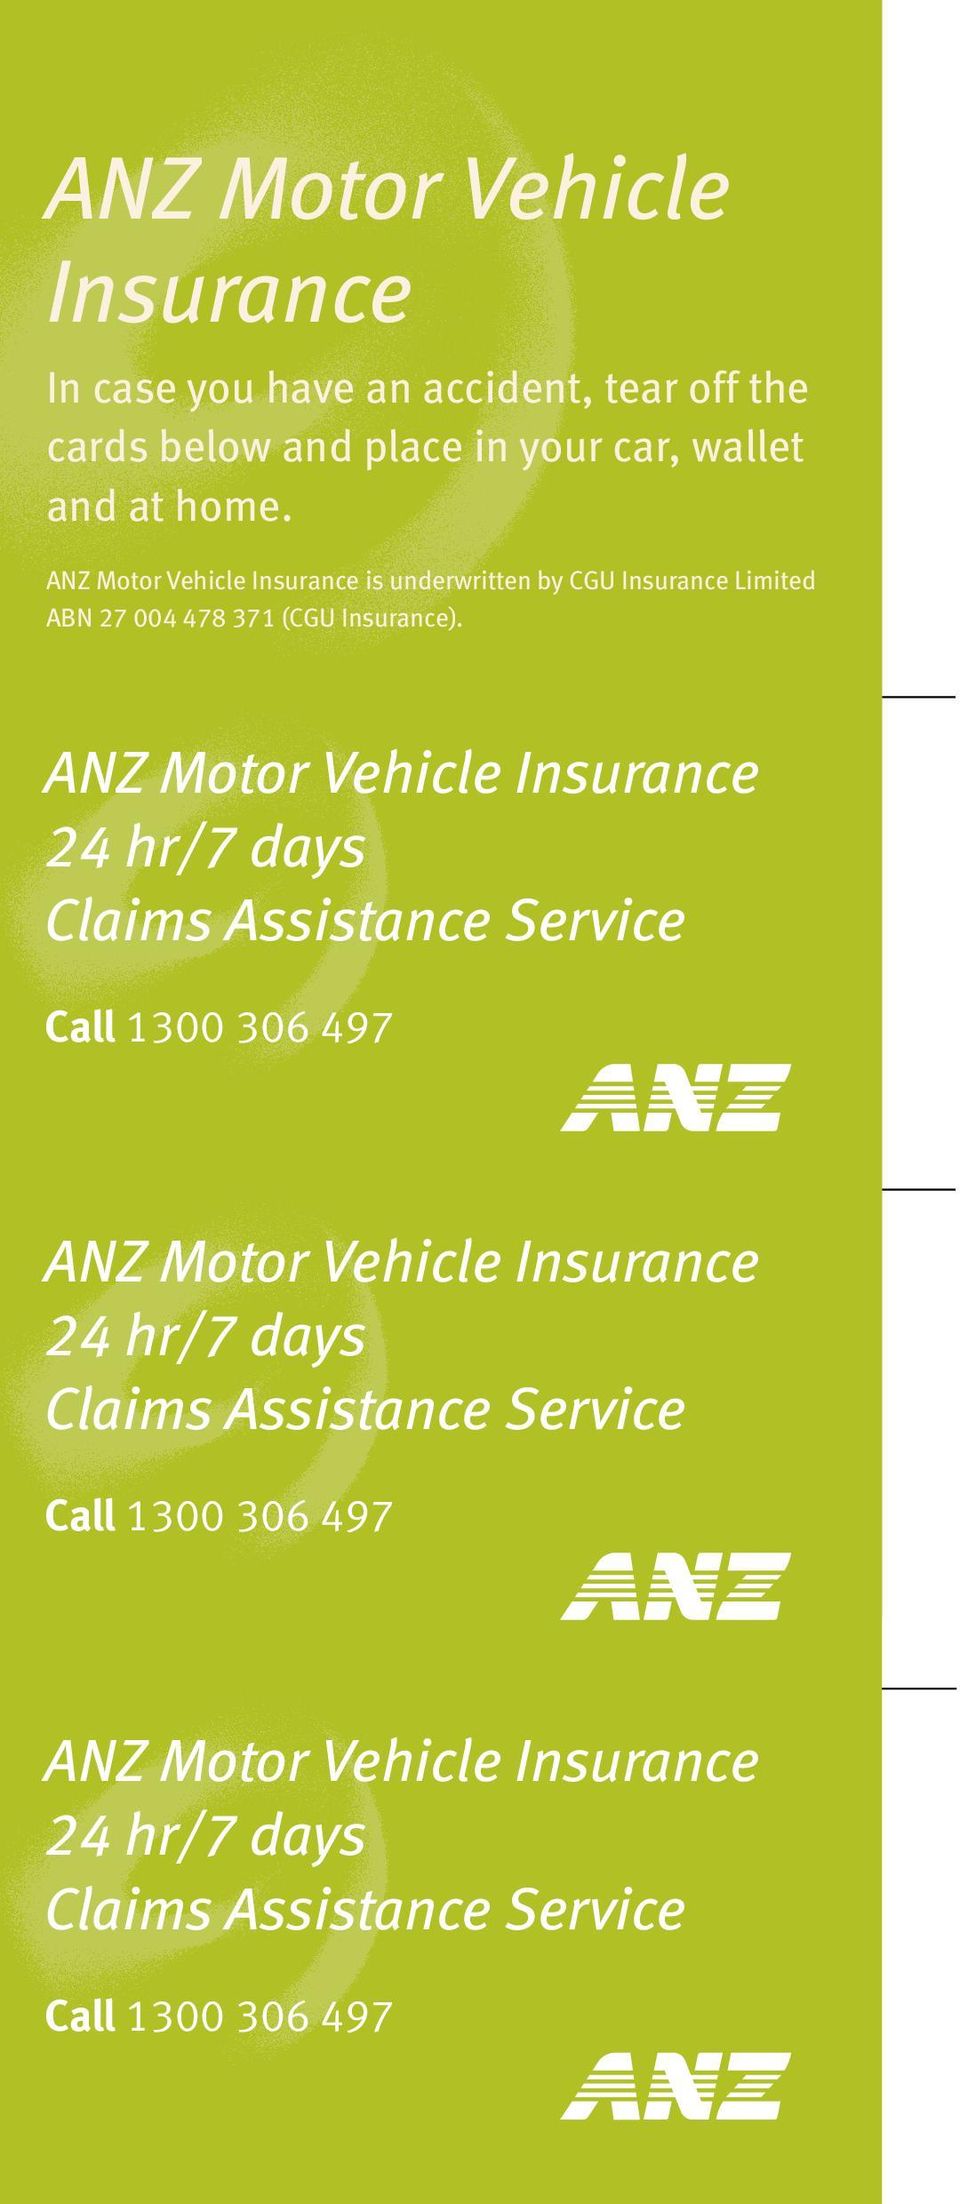 ANZ Motor Vehicle Insurance 24 hr/7 days Claims Assistance Service Call 1300 306 497 ANZ Motor Vehicle Insurance 24 hr/7